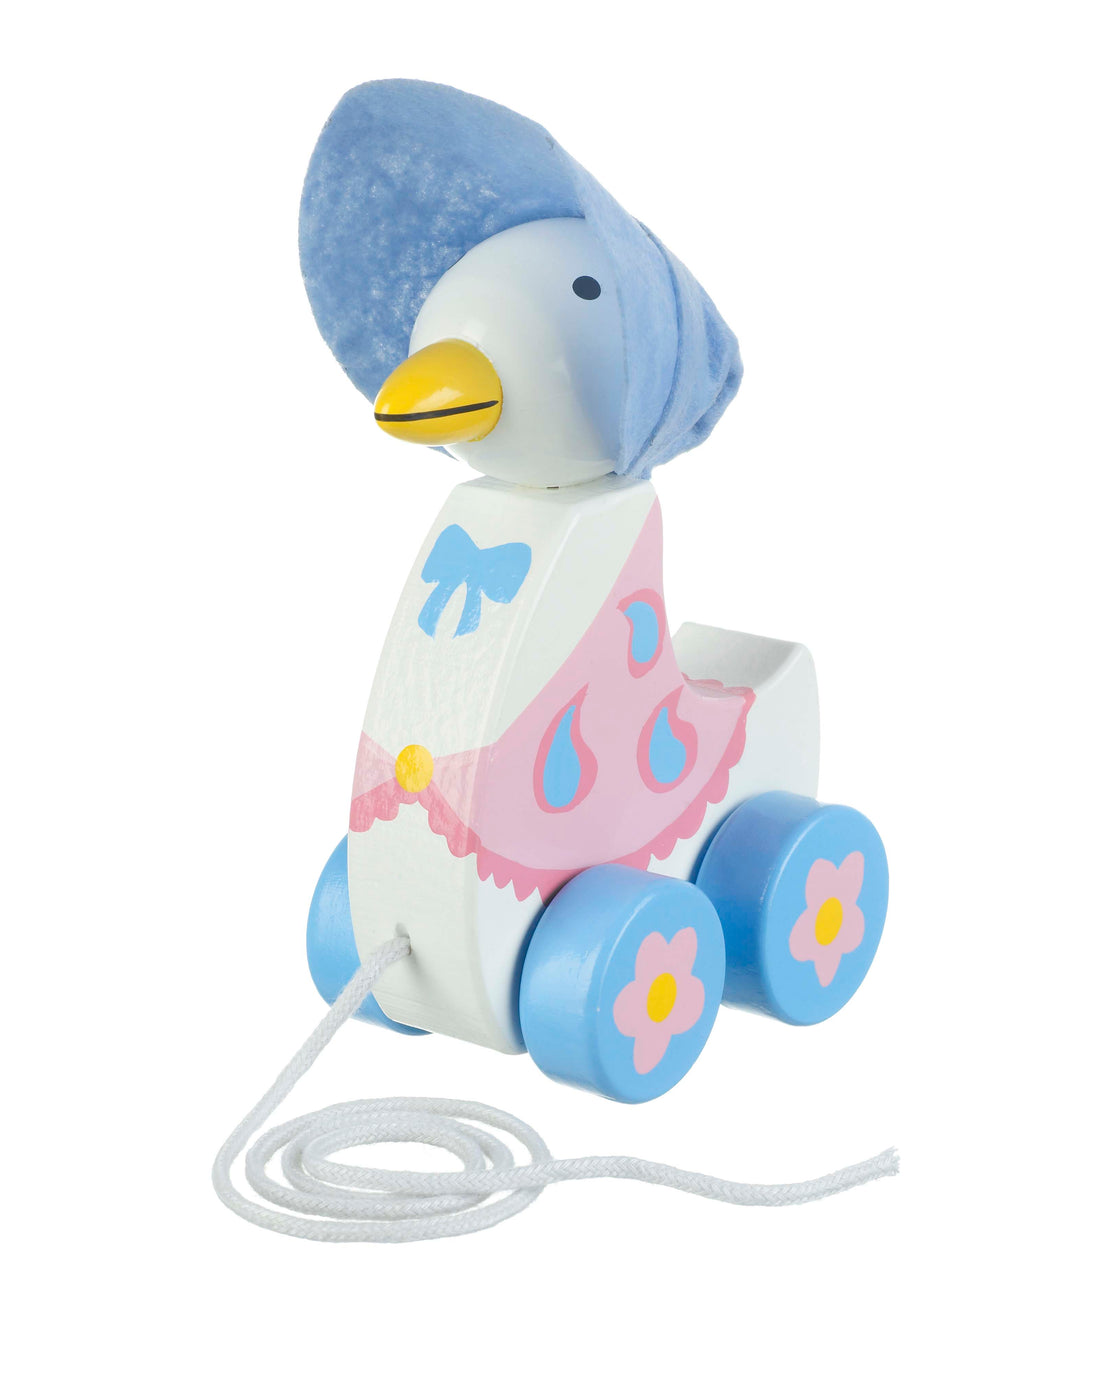 Wooden Pull Along Jemima Puddle-Duck Toy